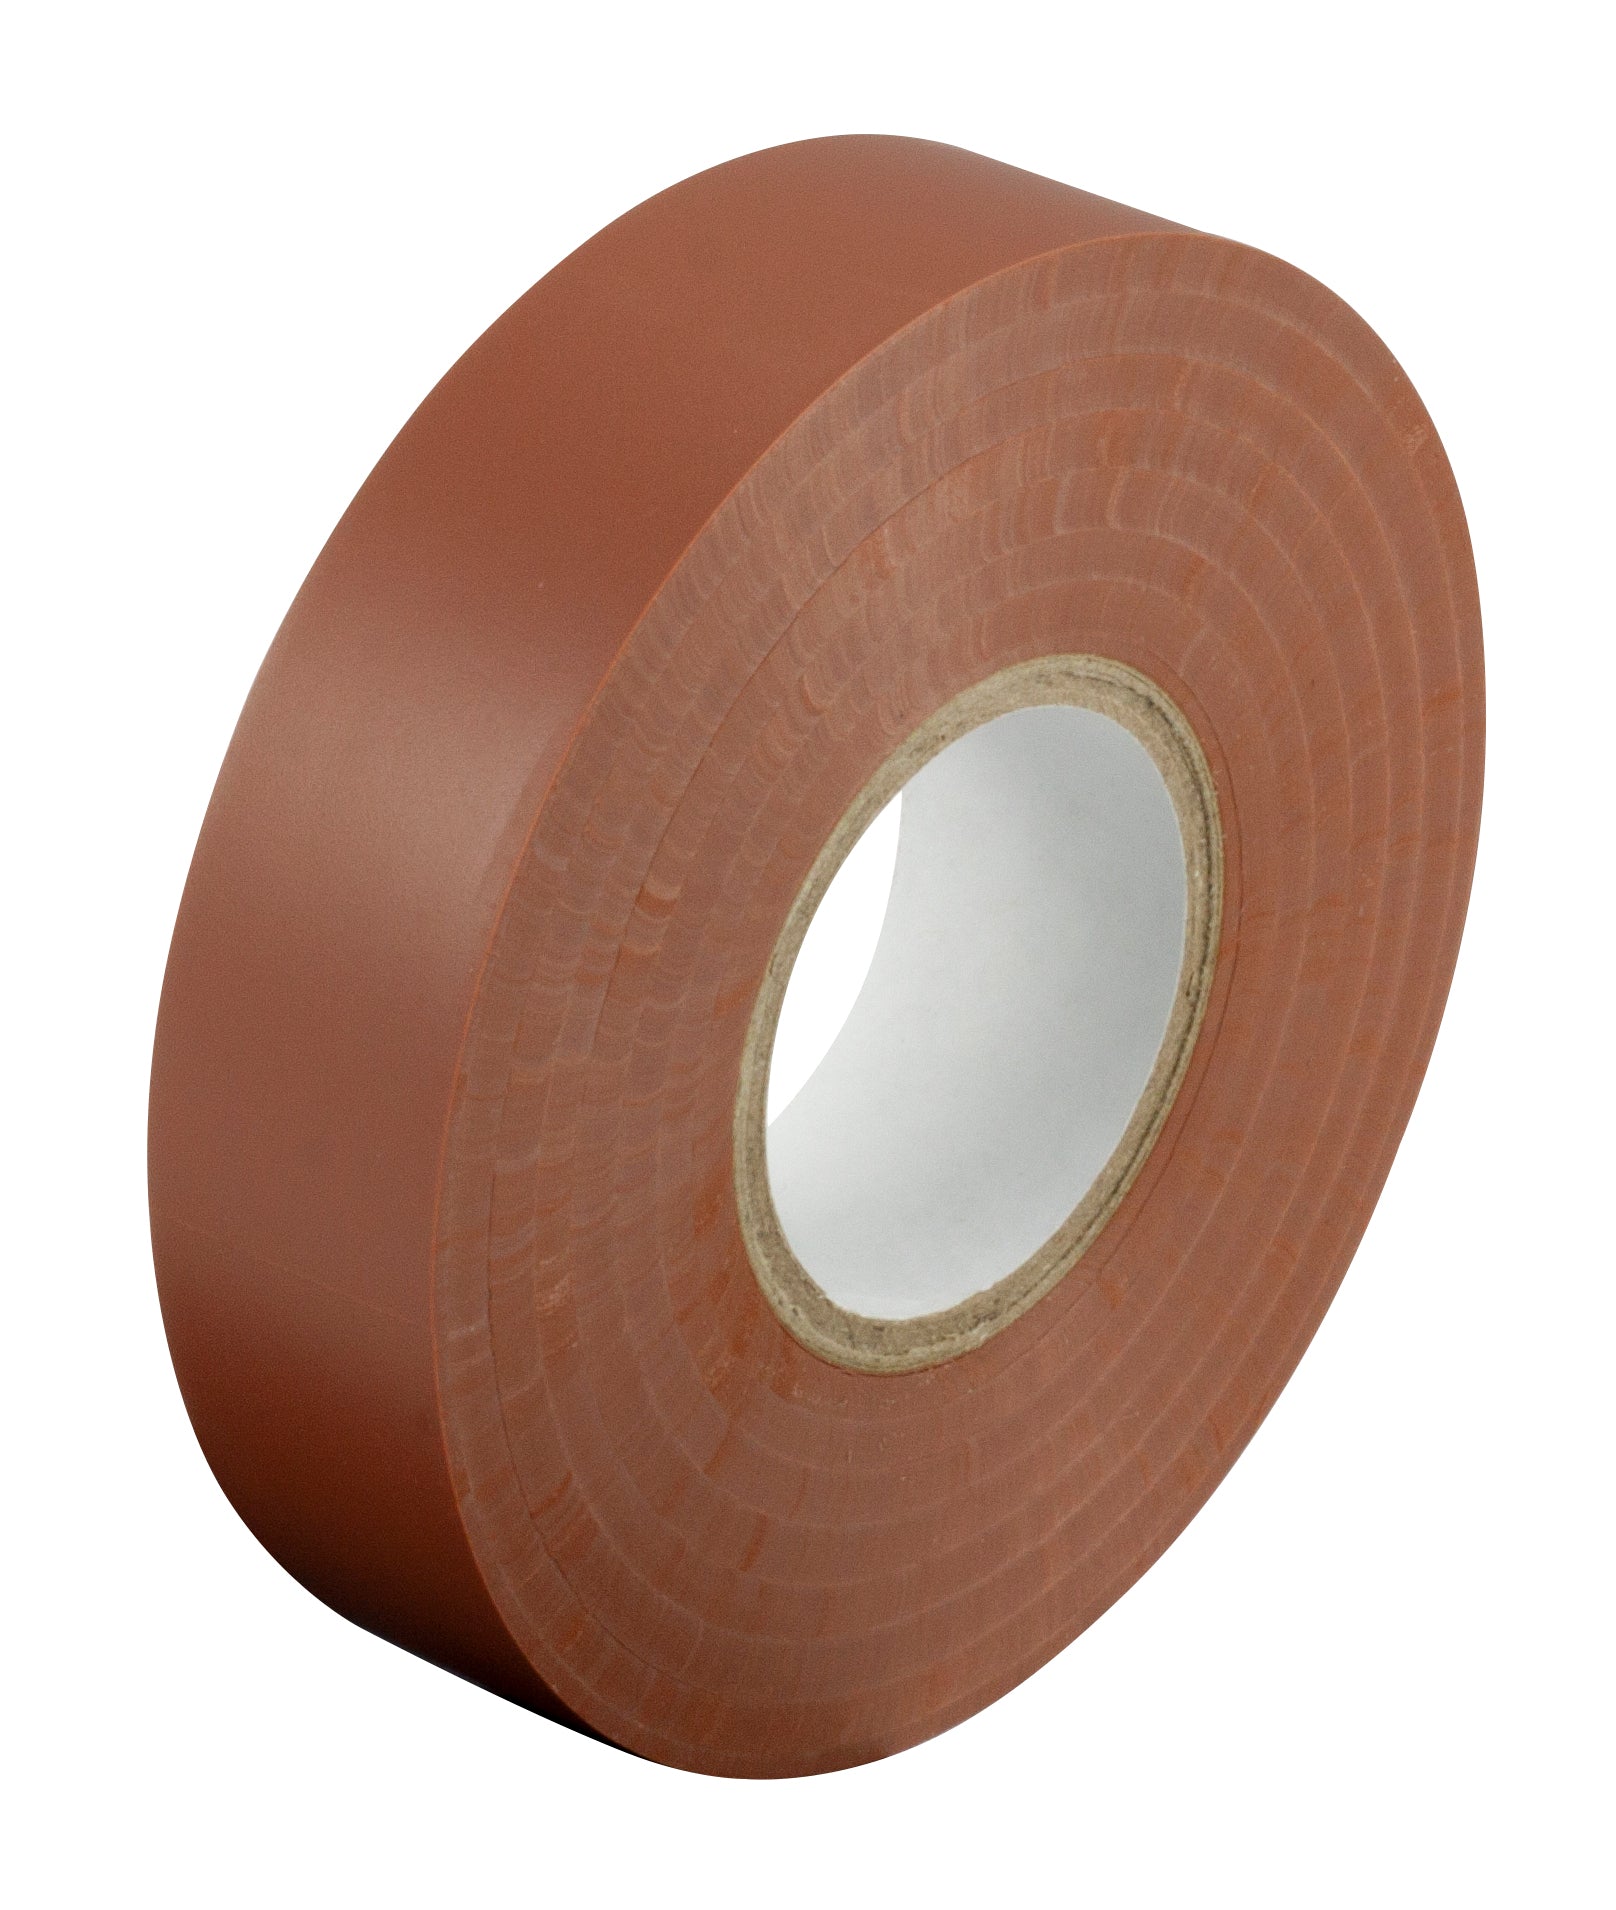 PVC Tape Size: 19mmx33m Roll - Brown - Pack of 10